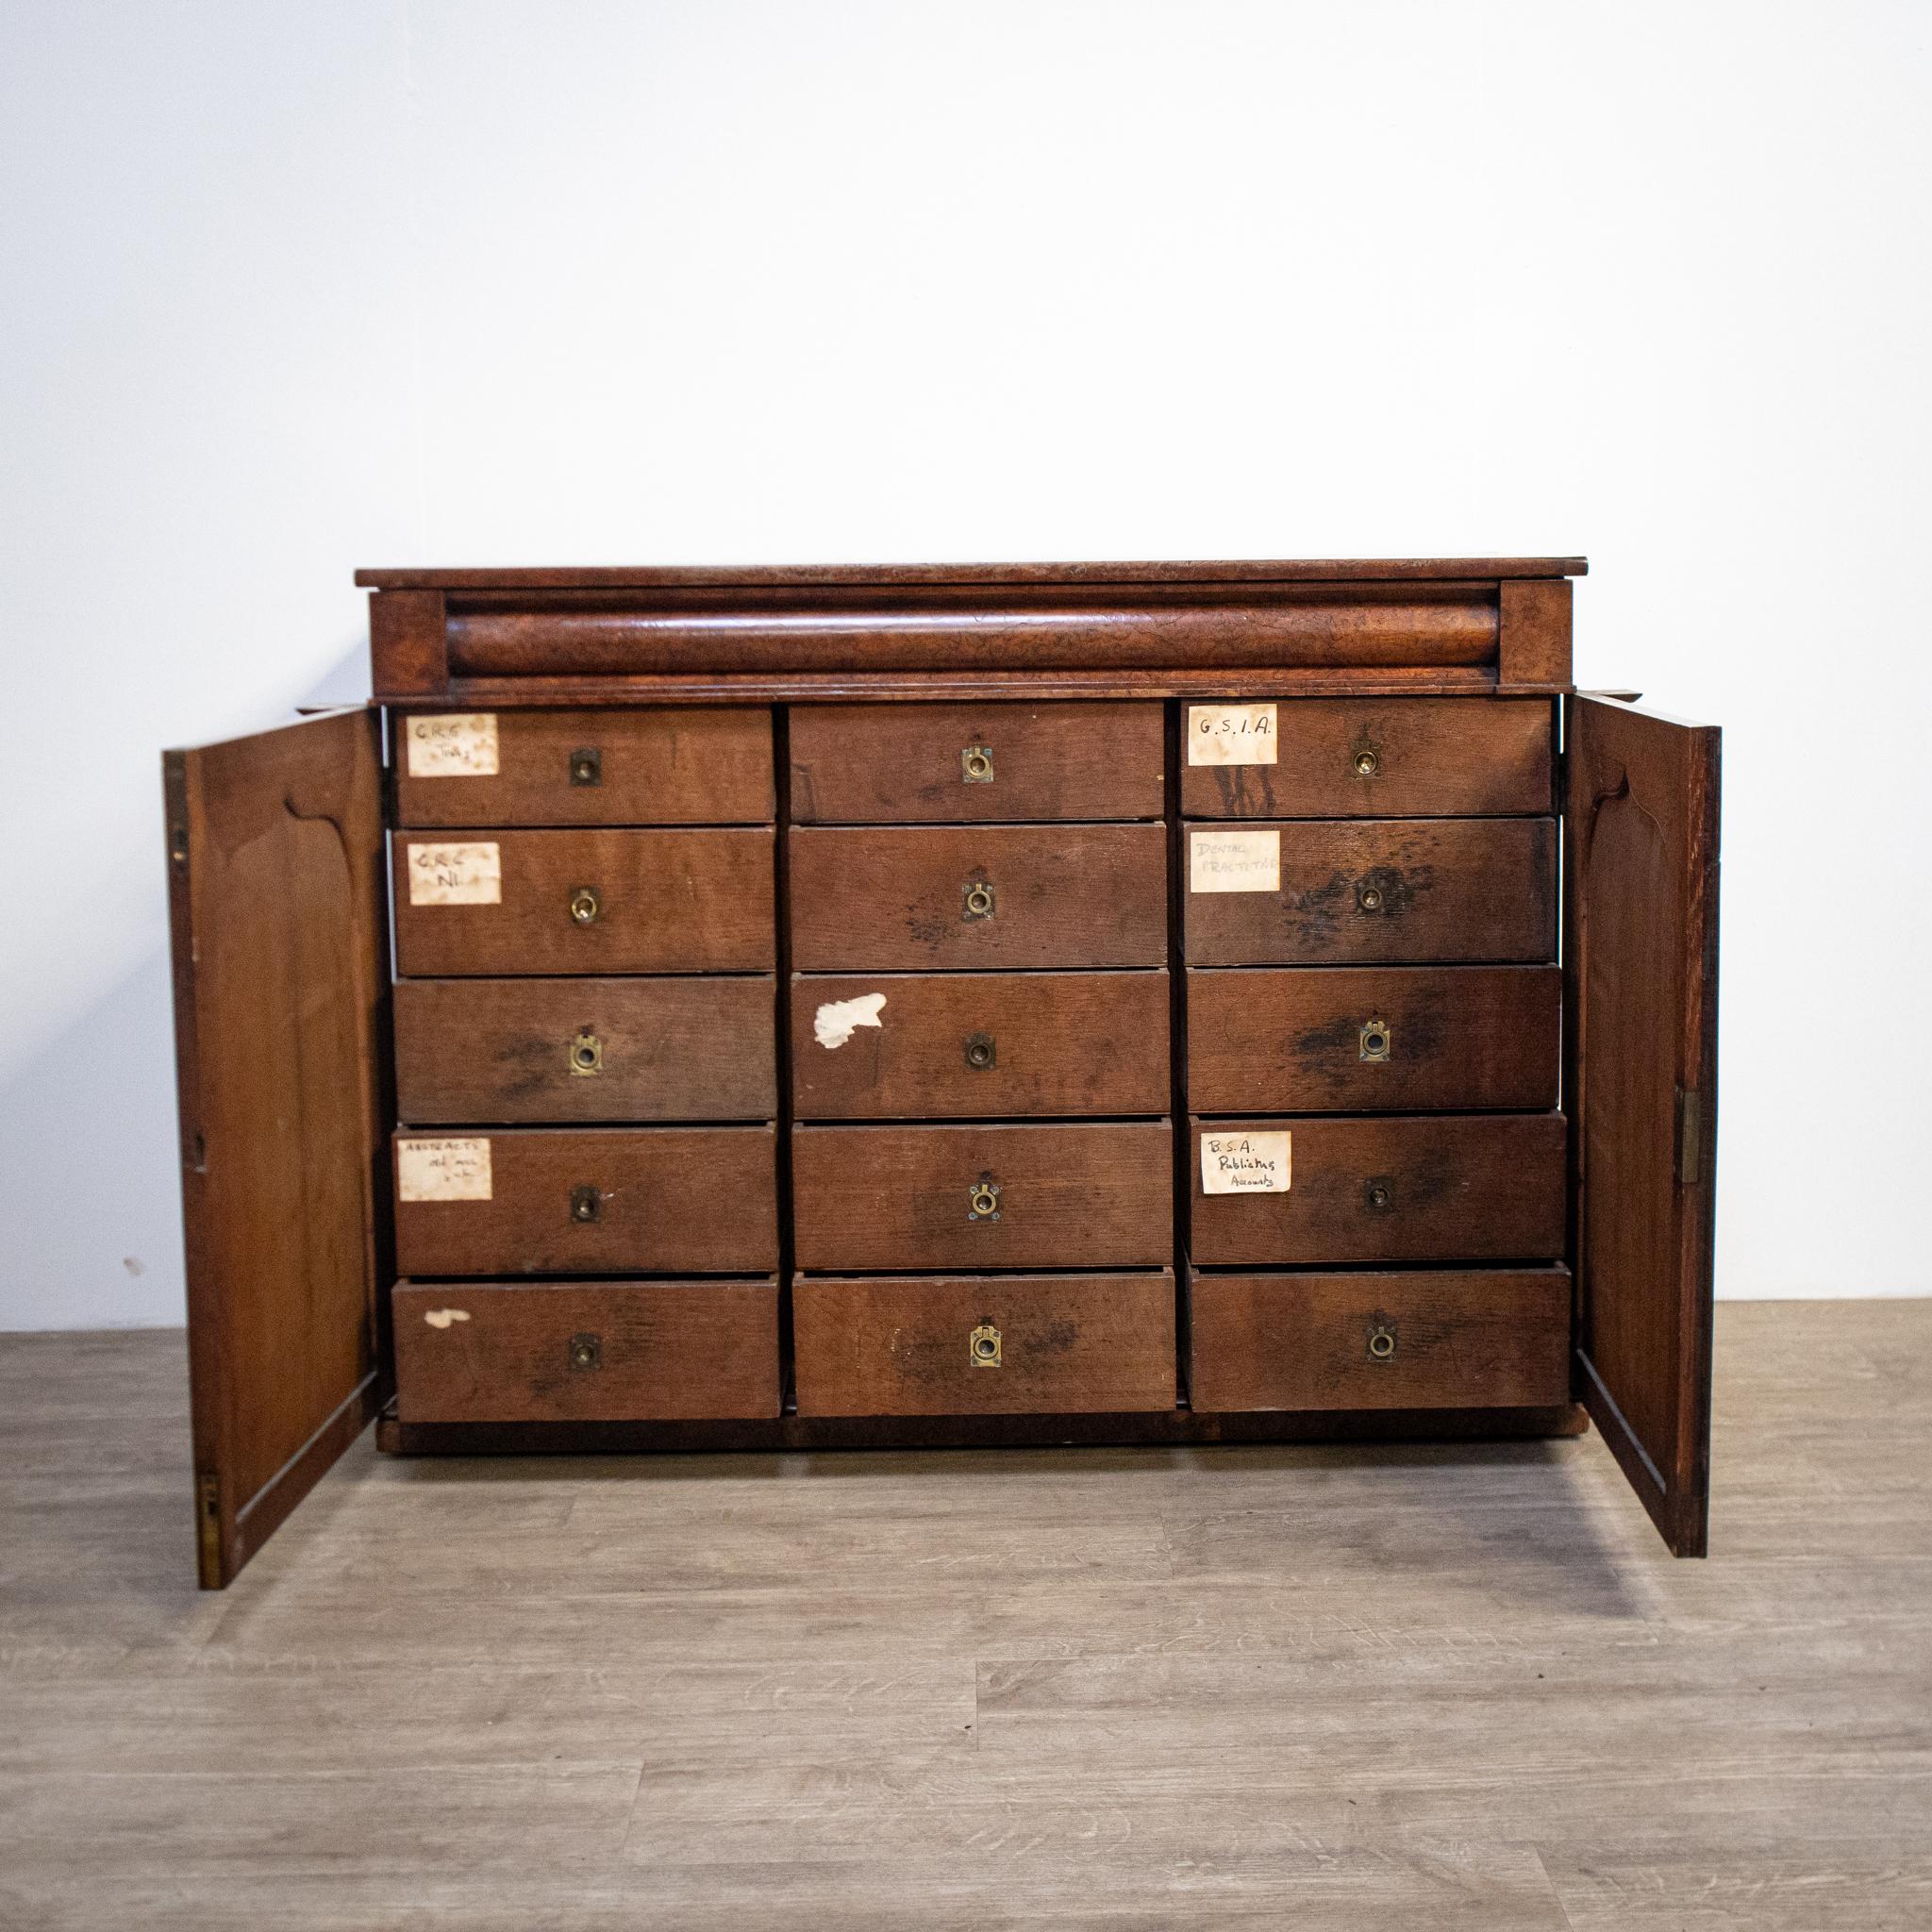 Burr Oak Estate Cupboard with Drawers In Good Condition For Sale In Newark, GB